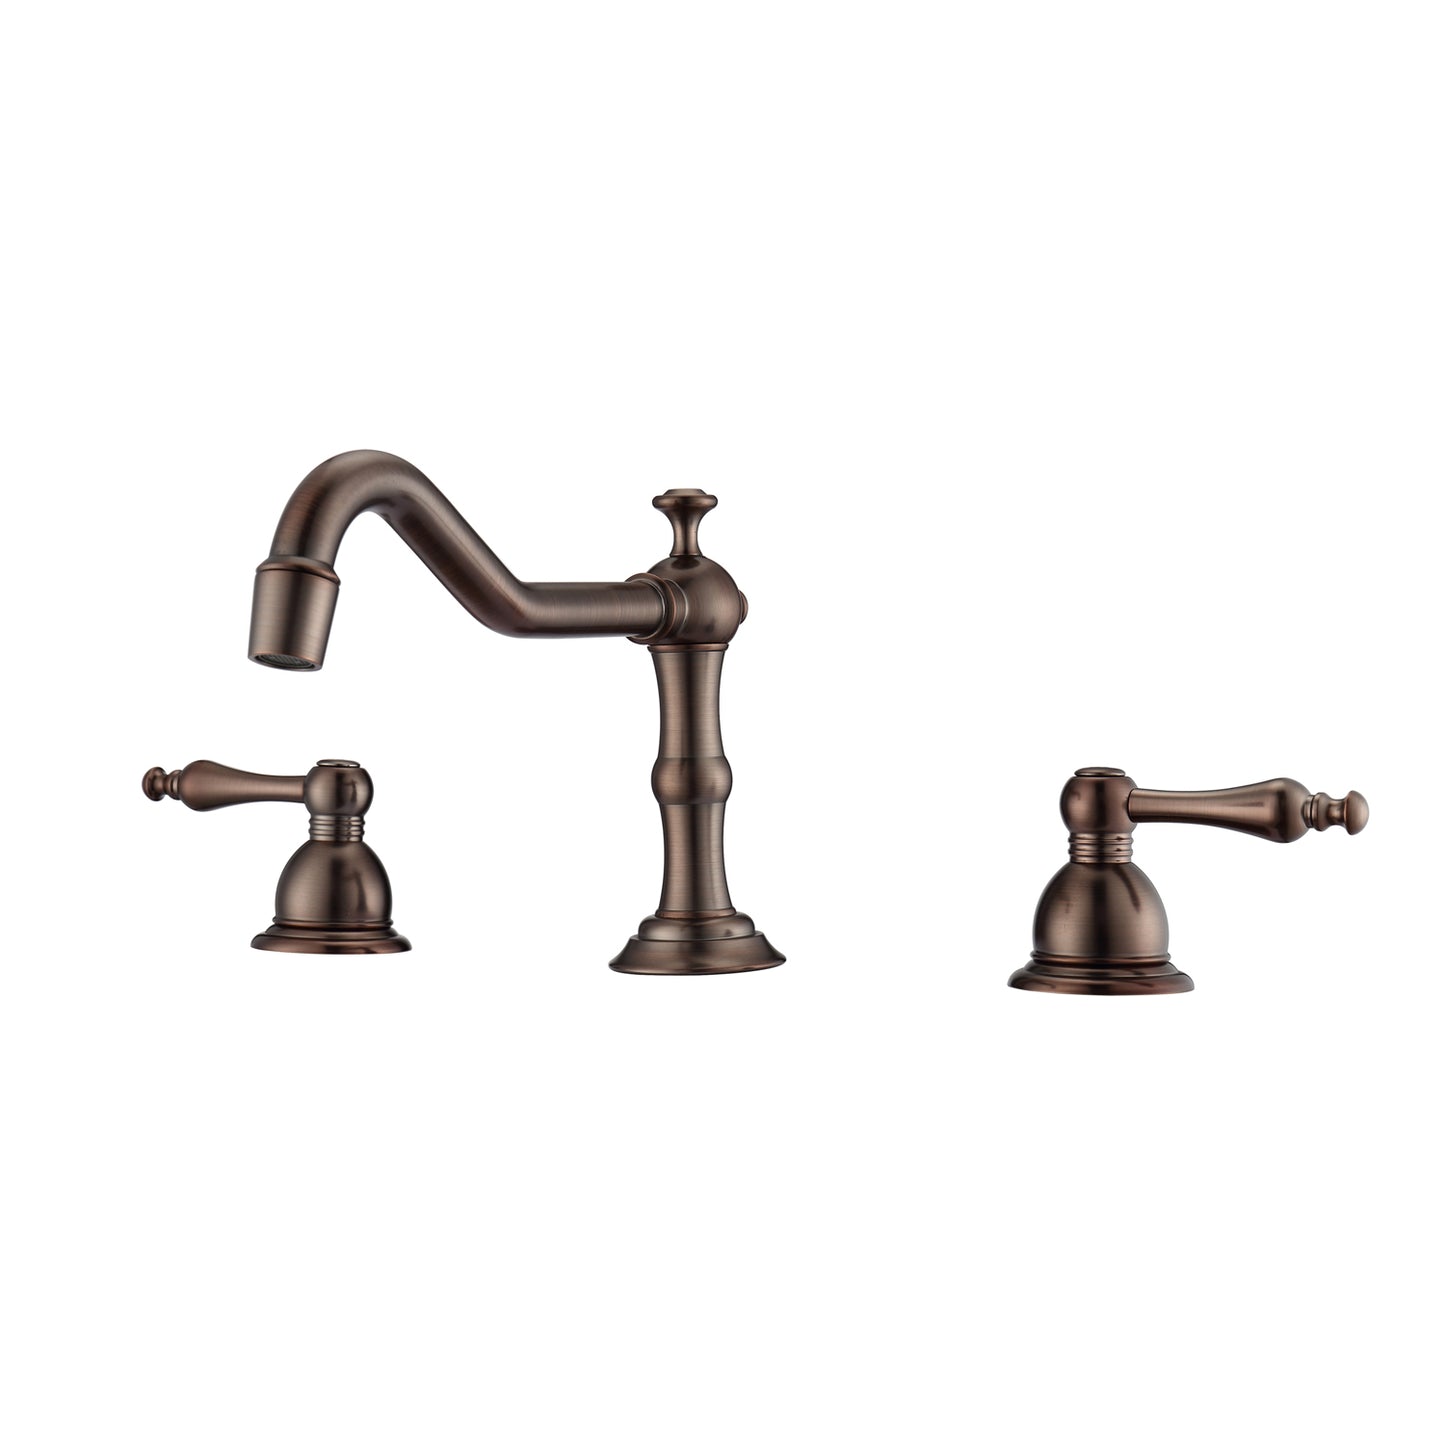 Roma 8" Widespread Oil Rubbed Bronze Bathroom Faucet with Metal Lever Handles